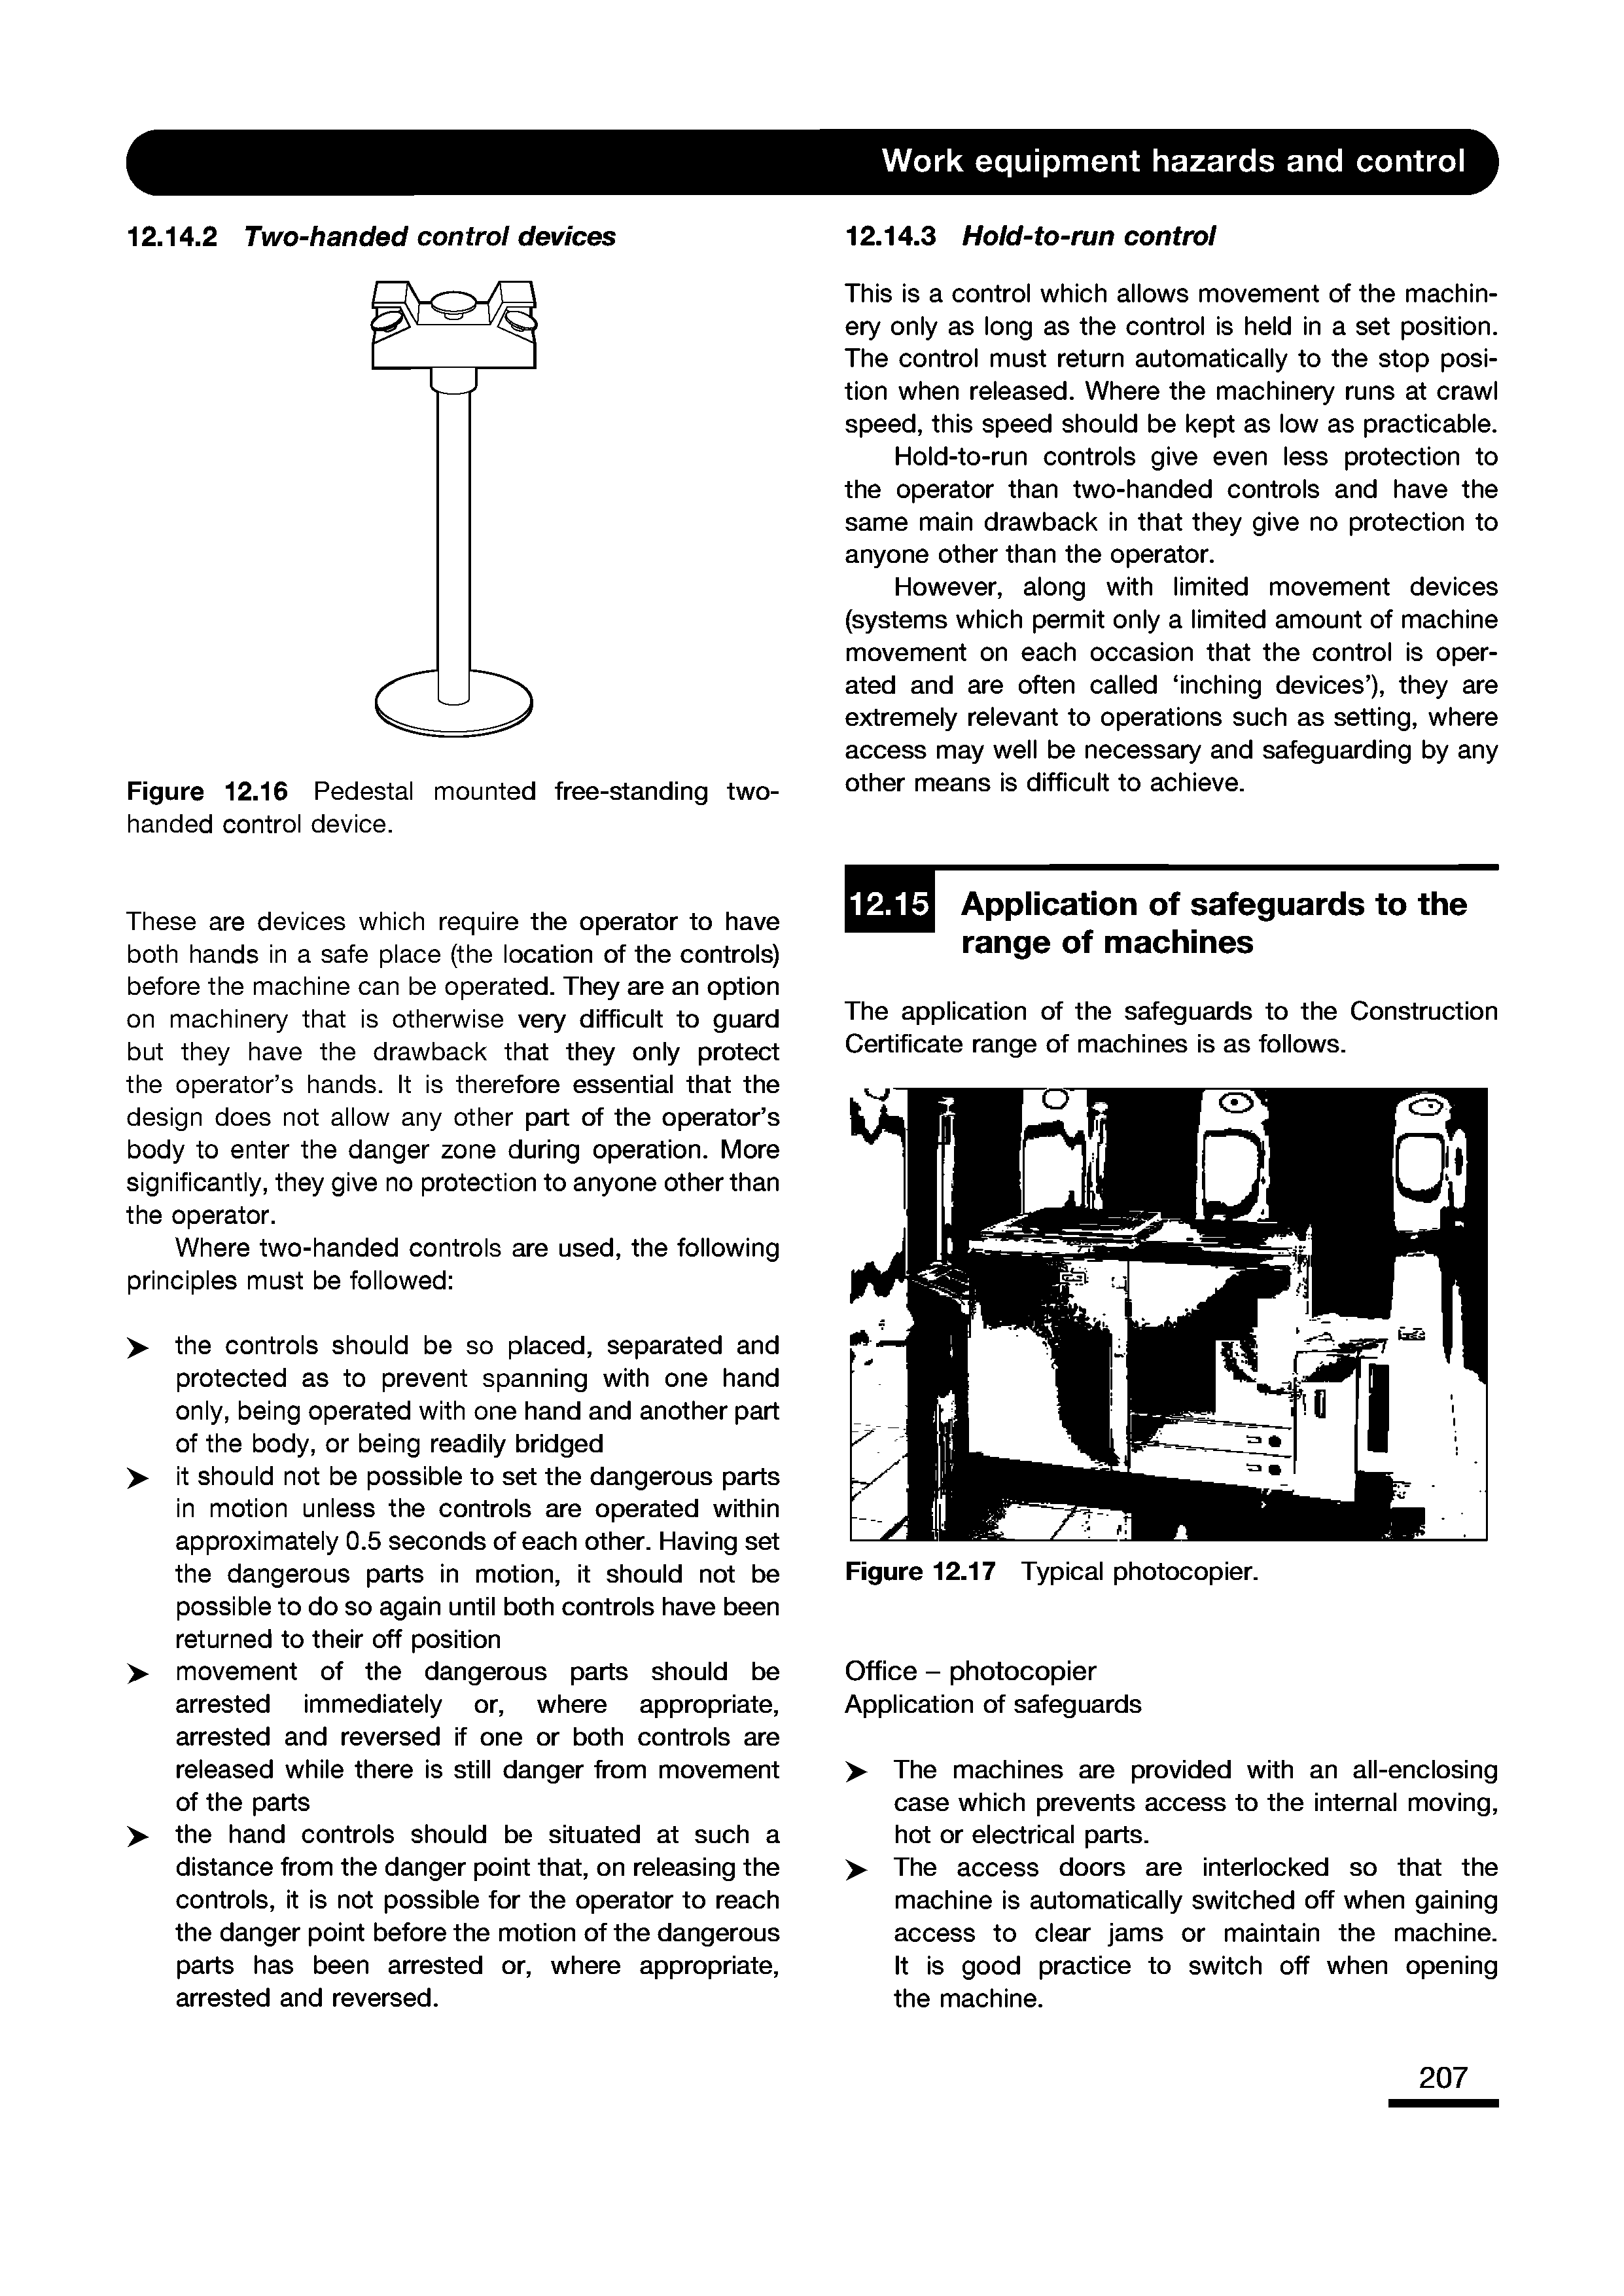 Figure 12.16 Pedestal mounted free-standing two-handed control device.